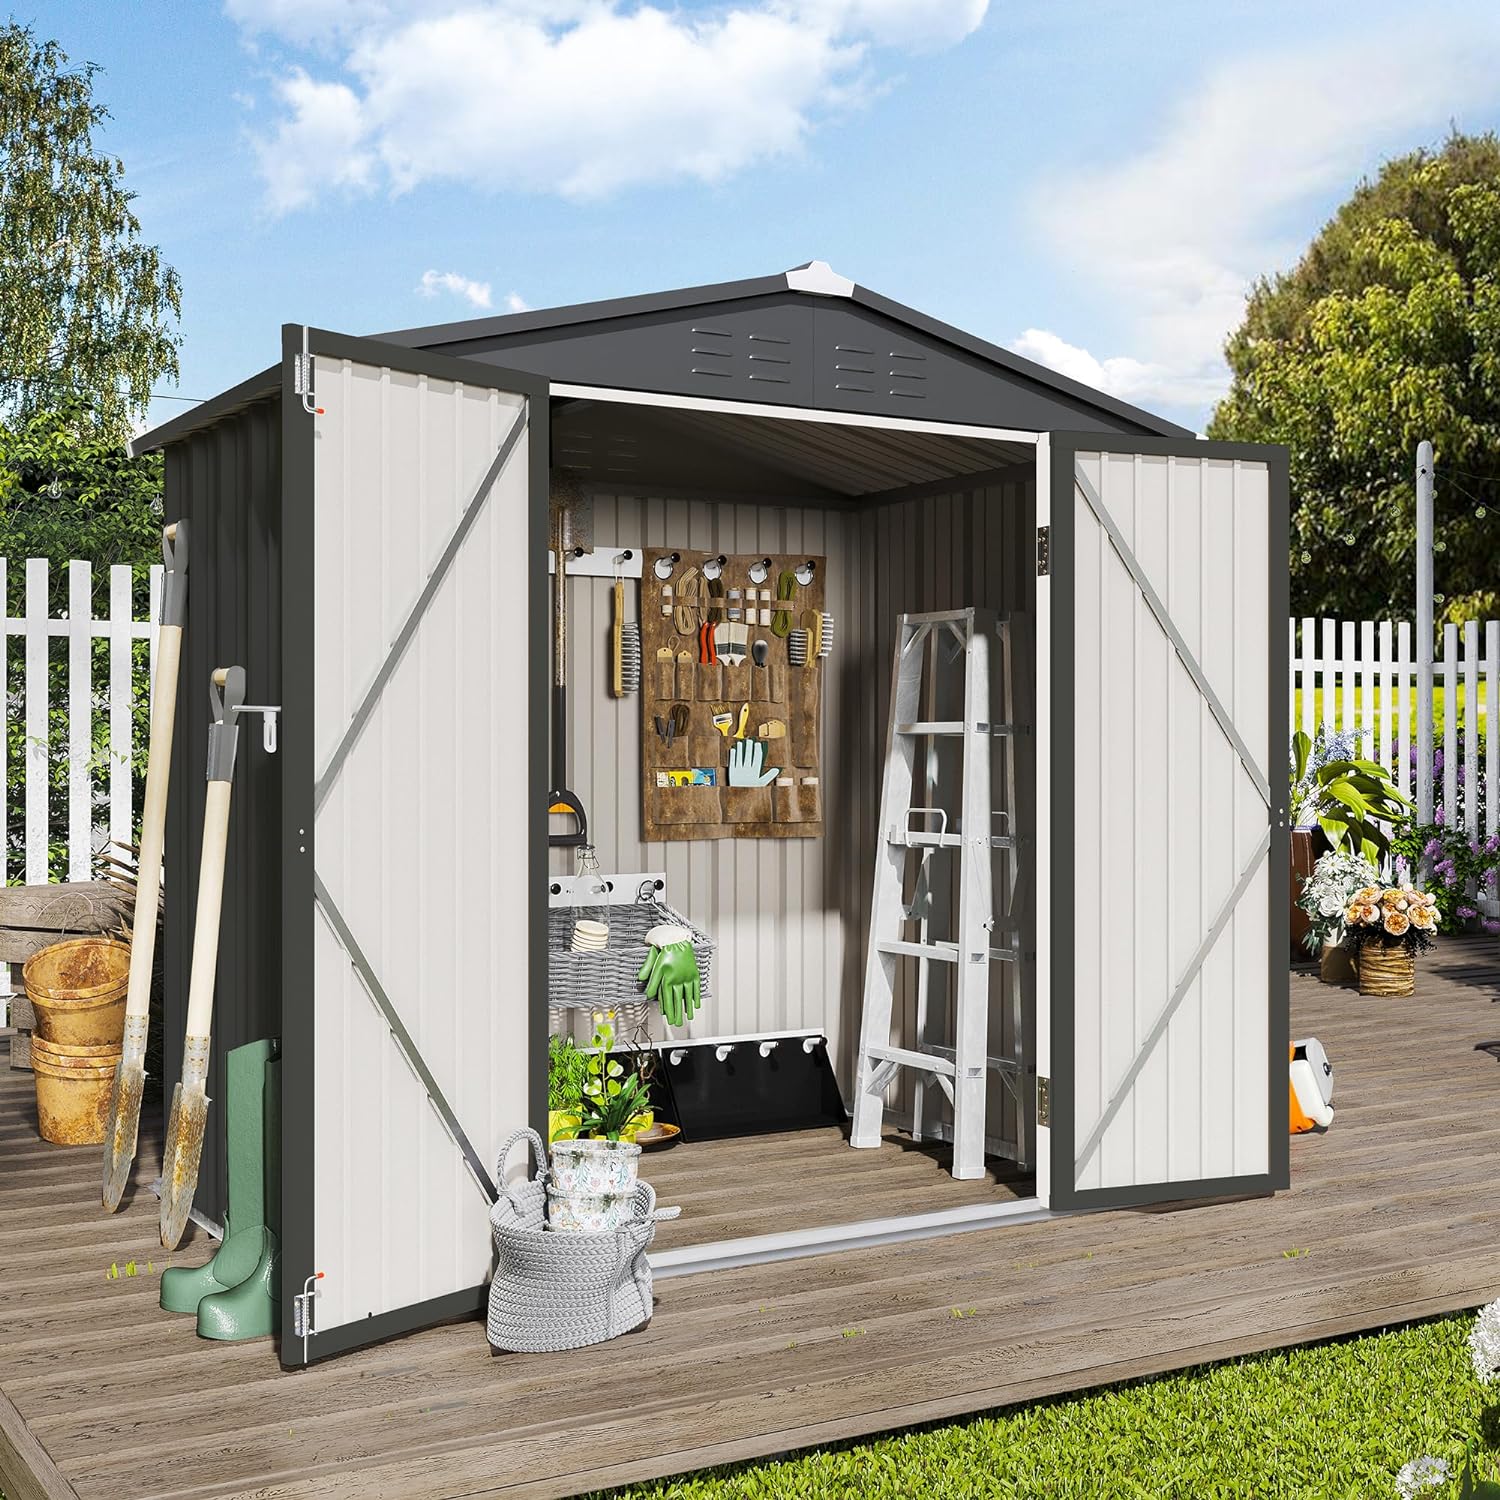 LAUSAINT Outdoor Storage Sheds 6×4′ Review